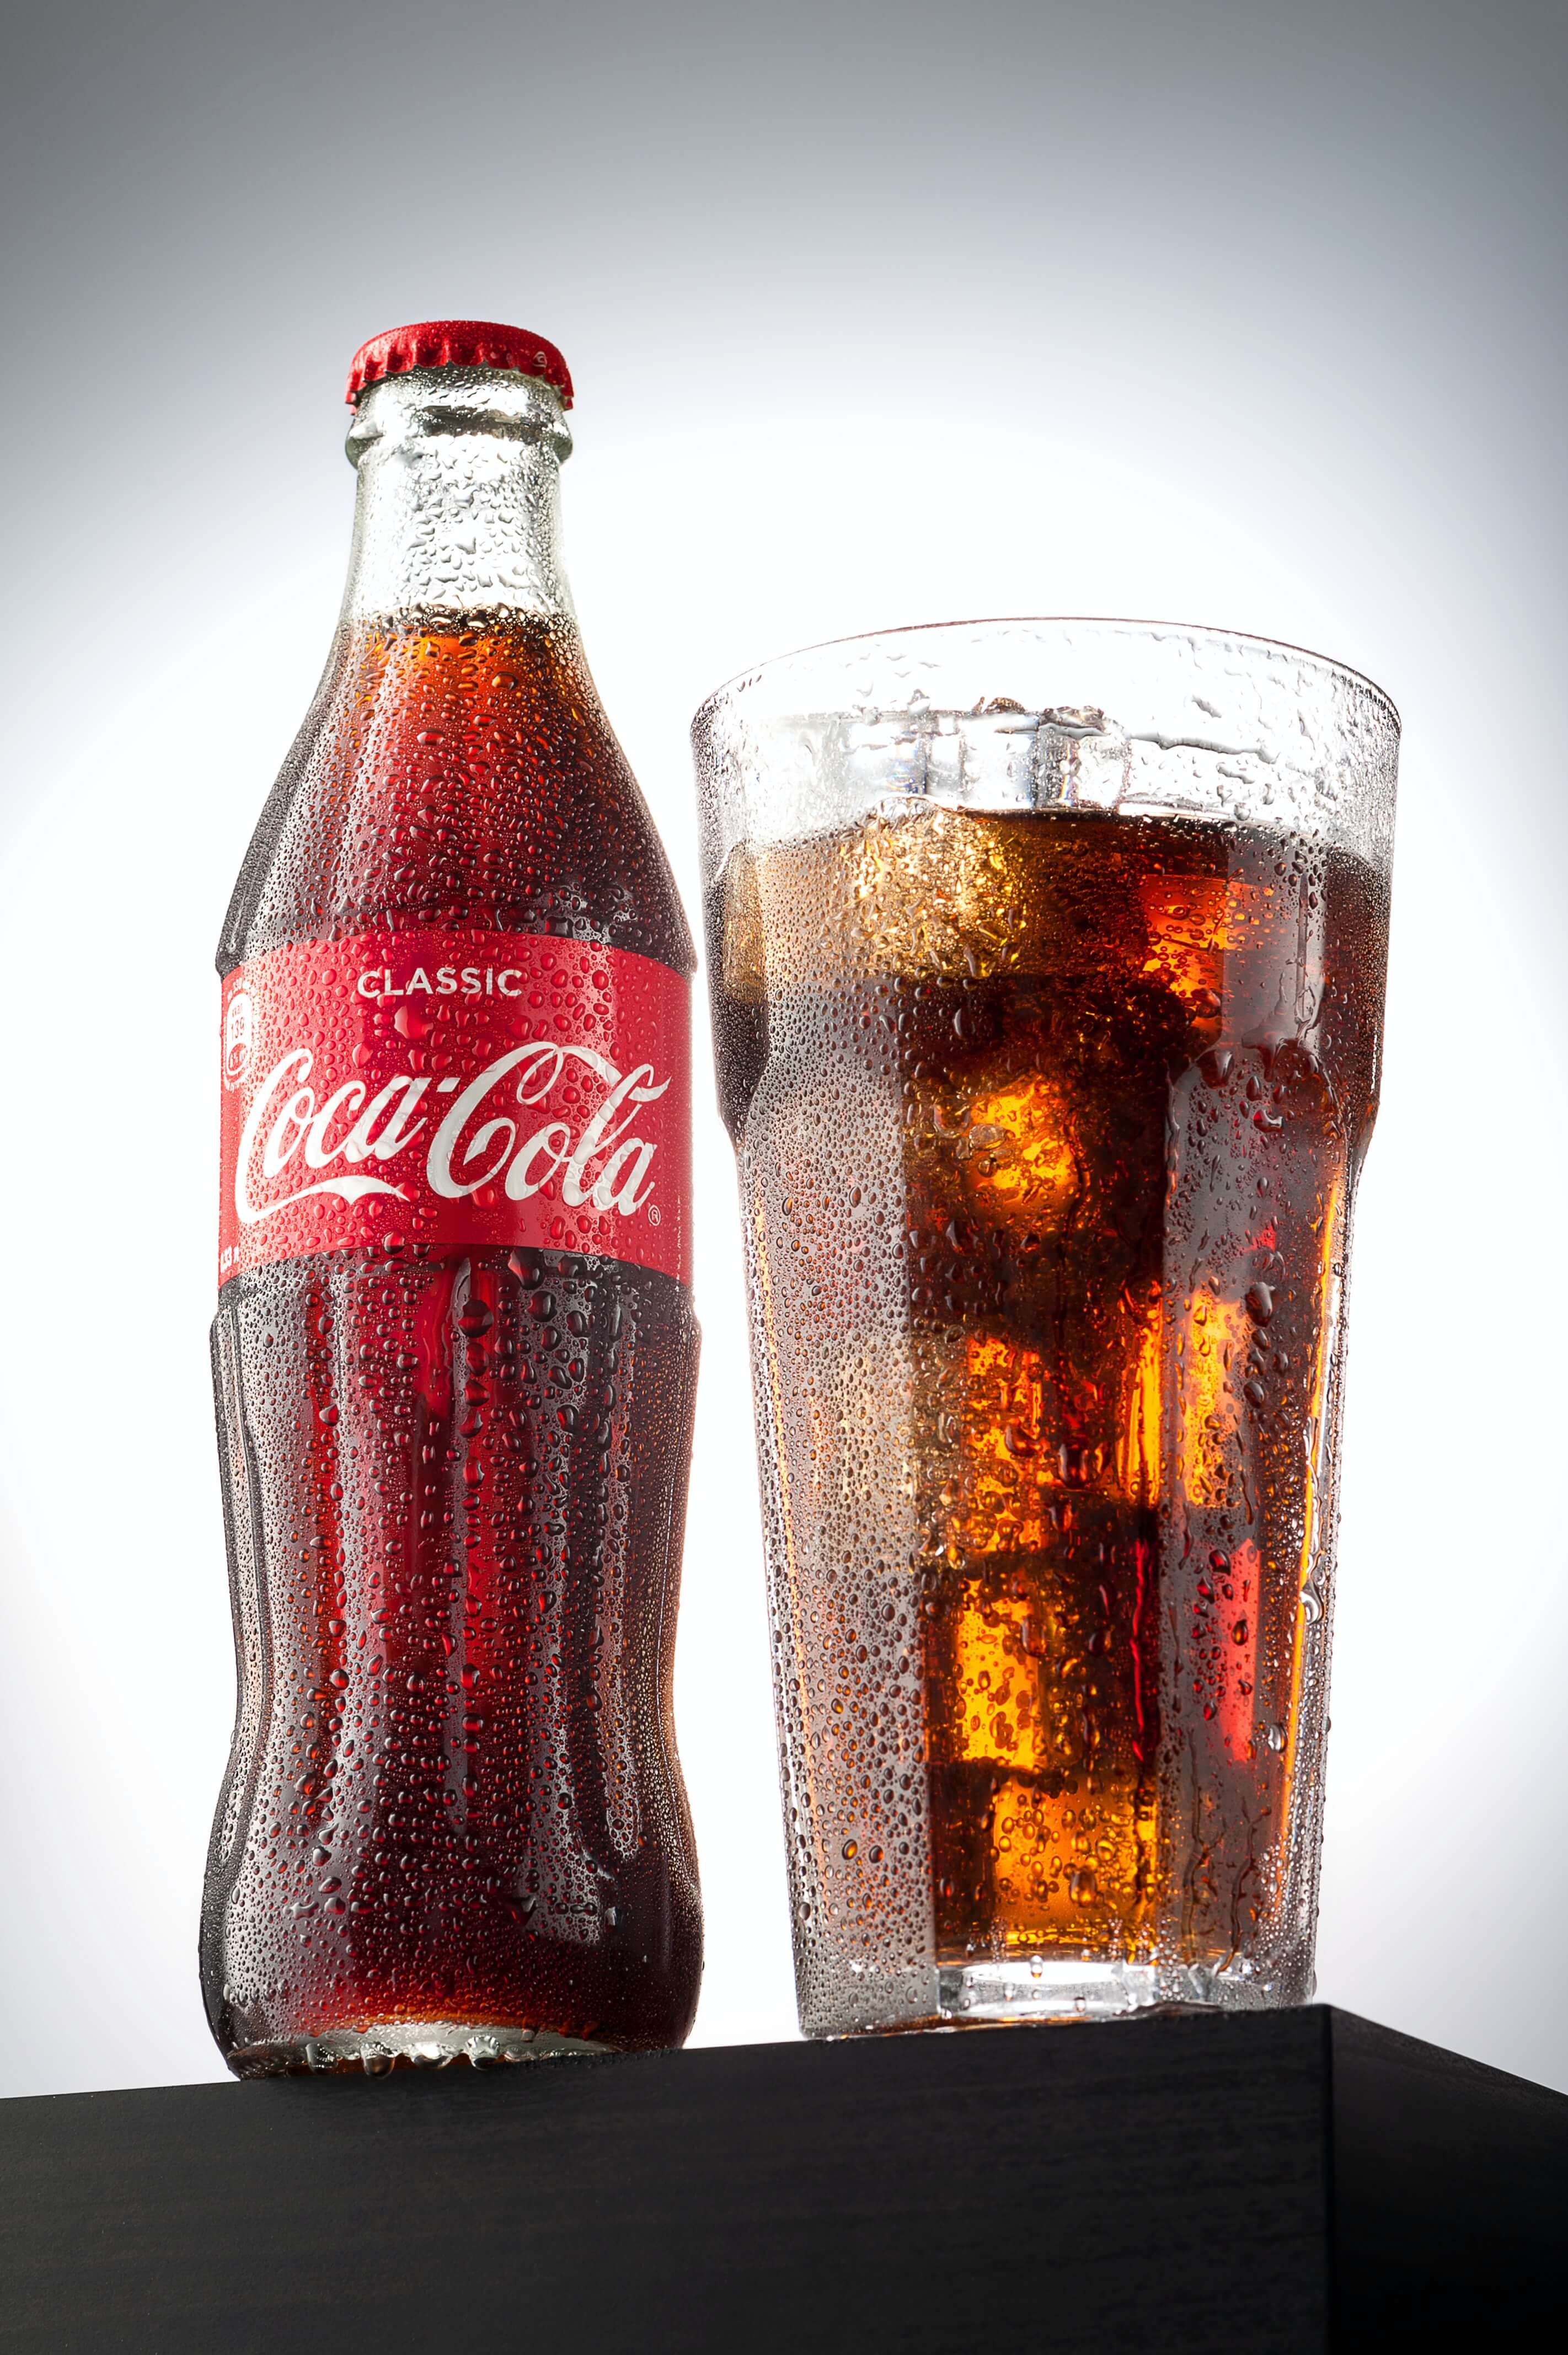 An image of Coca Cola to represent using it as Seasoning in Bulk within cooking.